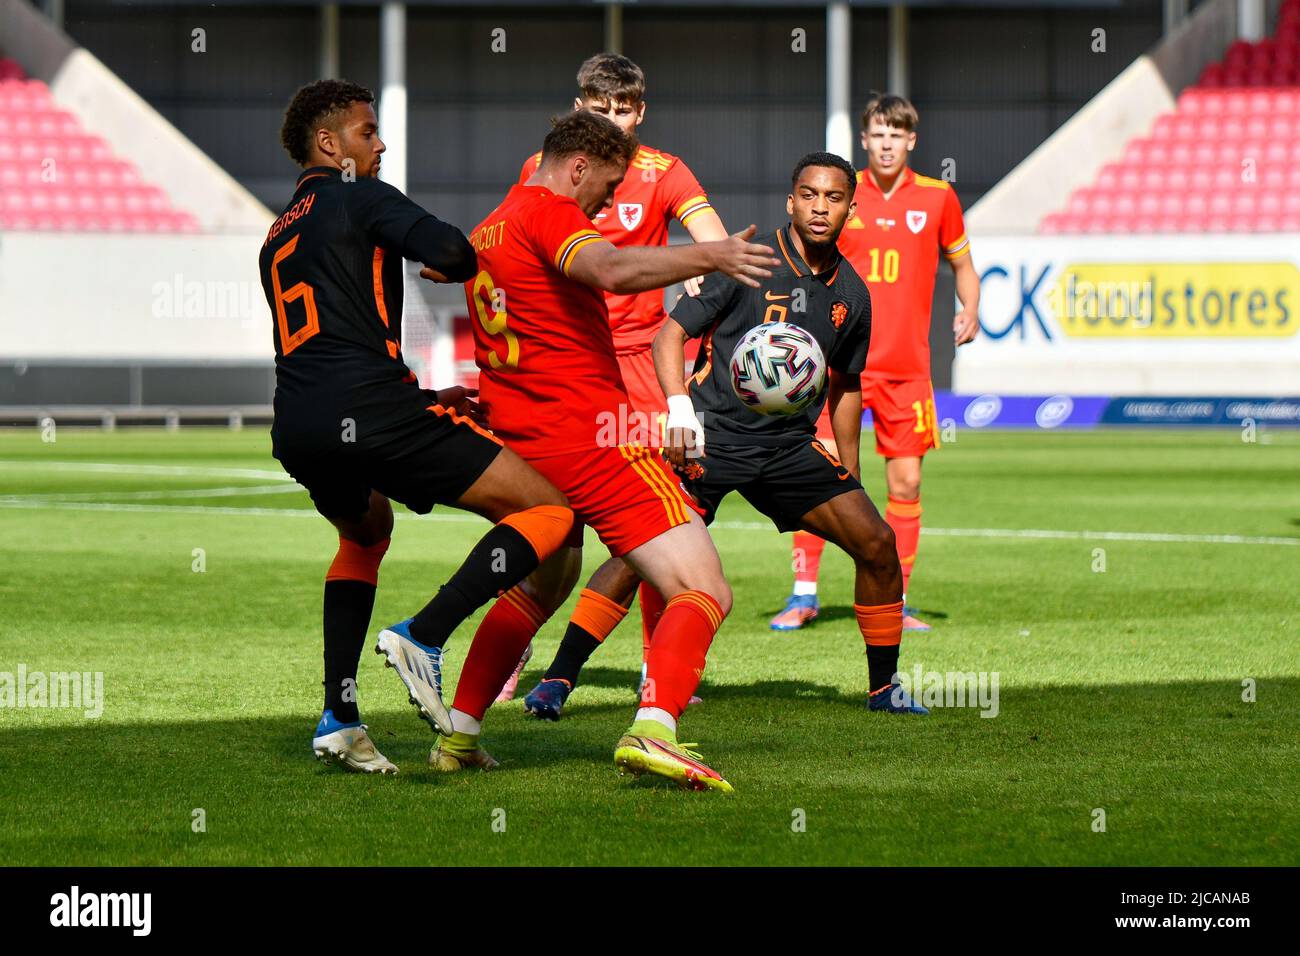 Llanelli, Wales. 11 June, 2022. Luke Jephcott of Wales U21 shields the ball from Devyne Rensch of Netherlands U21 during the UEFA European Under-21 Championship Qualifier Group E match between between Wales U21 and Netherlands U21 at Parc y Scarlets in Llanelli, Wales, UK on 11, June 2022. Credit: Duncan Thomas/Majestic Media. Stock Photo